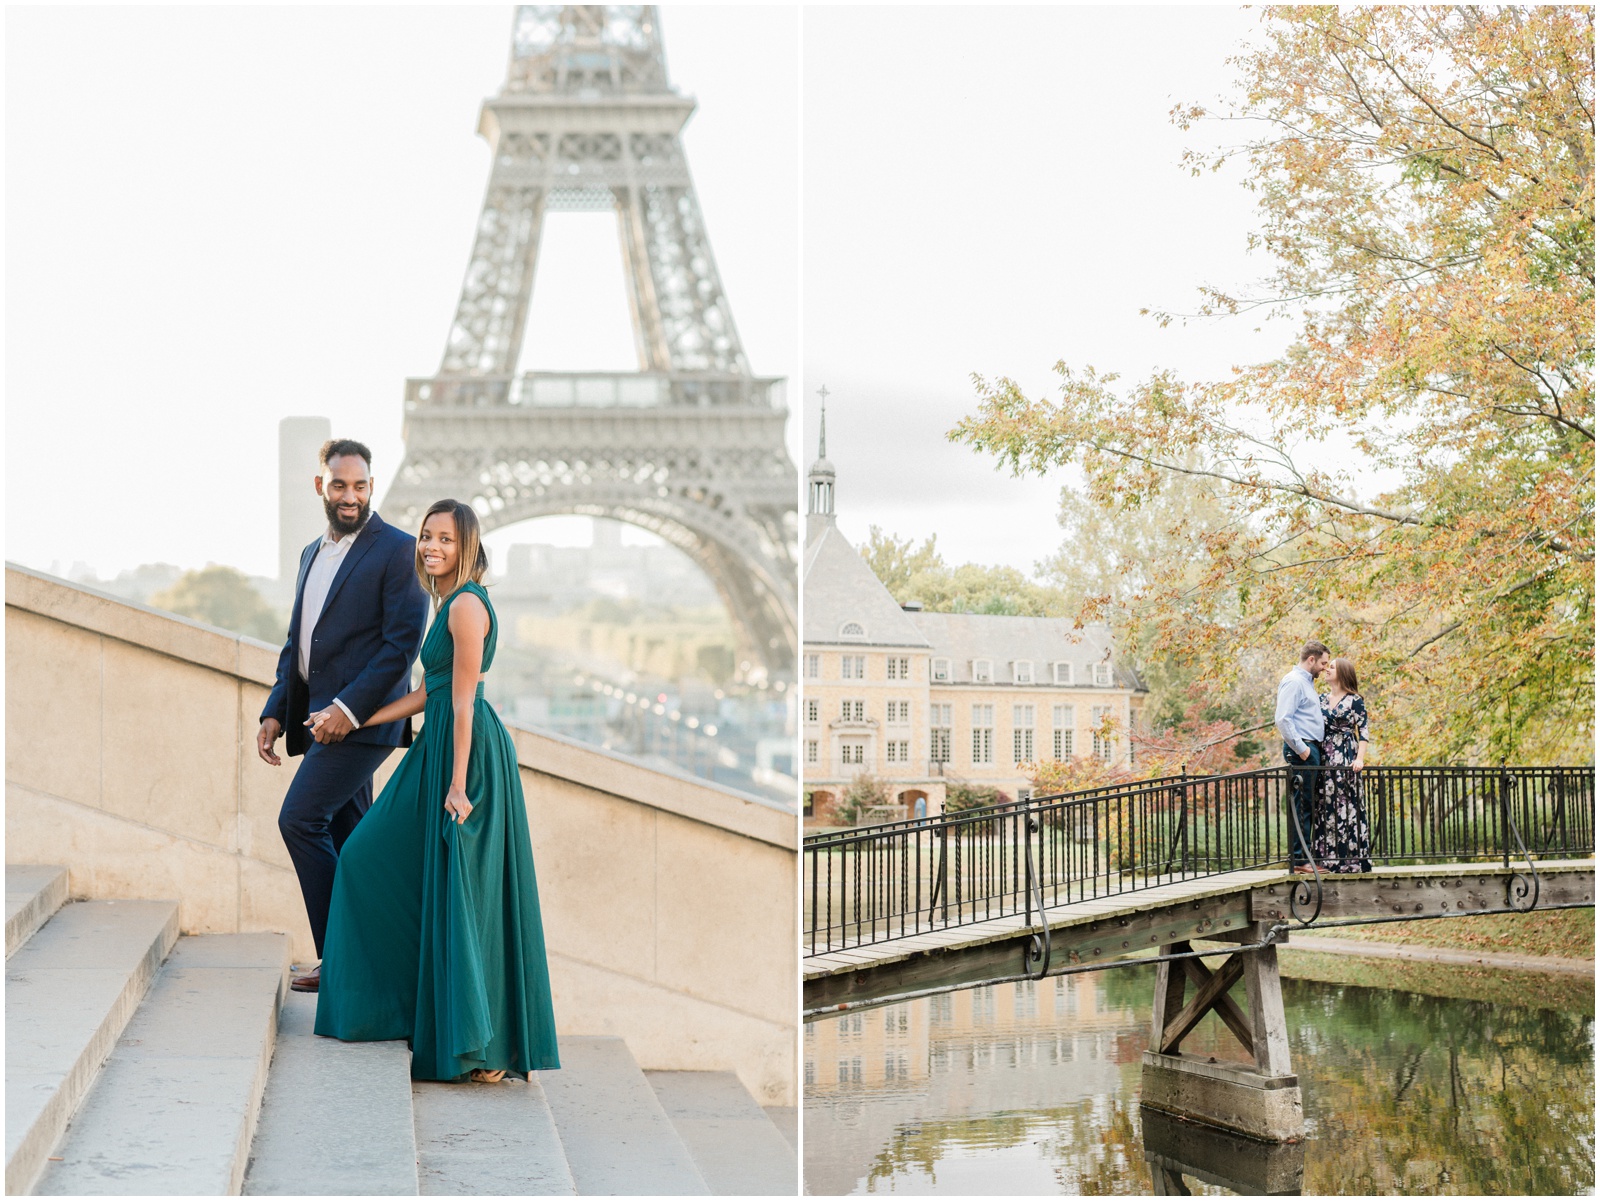 5 Tips for Your Engagement Session: Choose a Meaningful Location